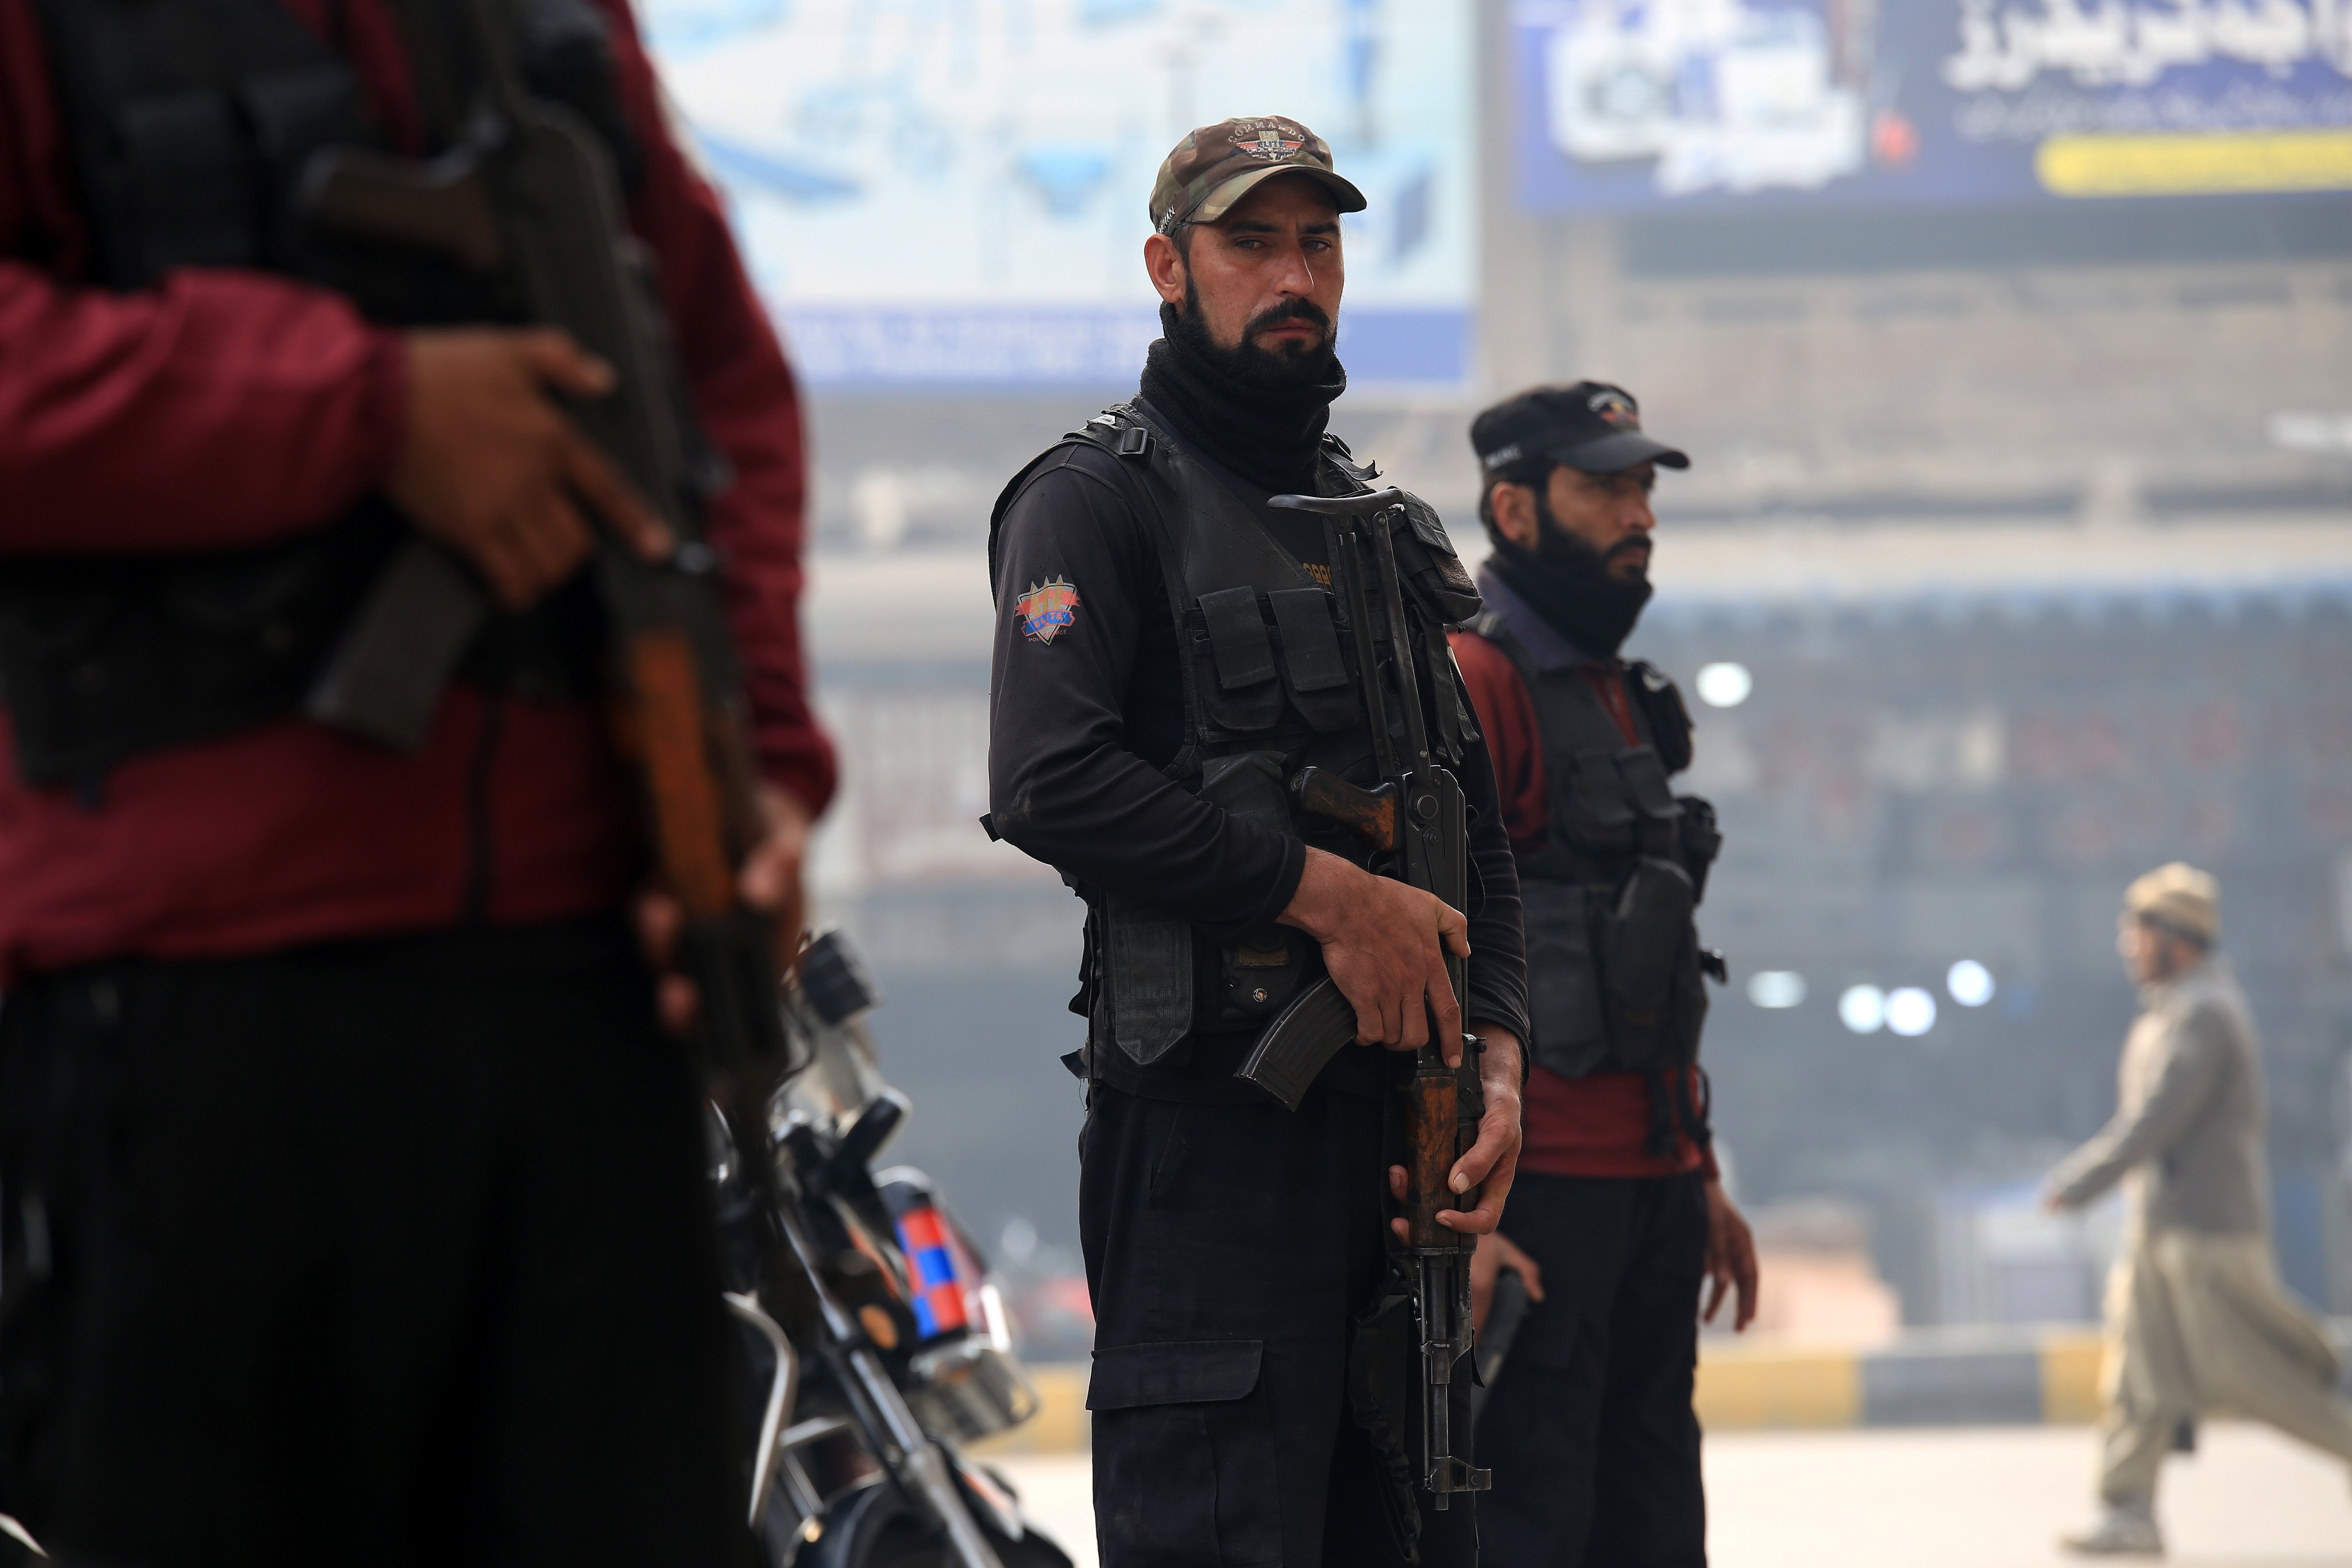 Pakistani security personnel wait at a checkpoint in Peshawar in December following deadly attacks by militants targeting soldiers and police. Photo: EPA-EFE